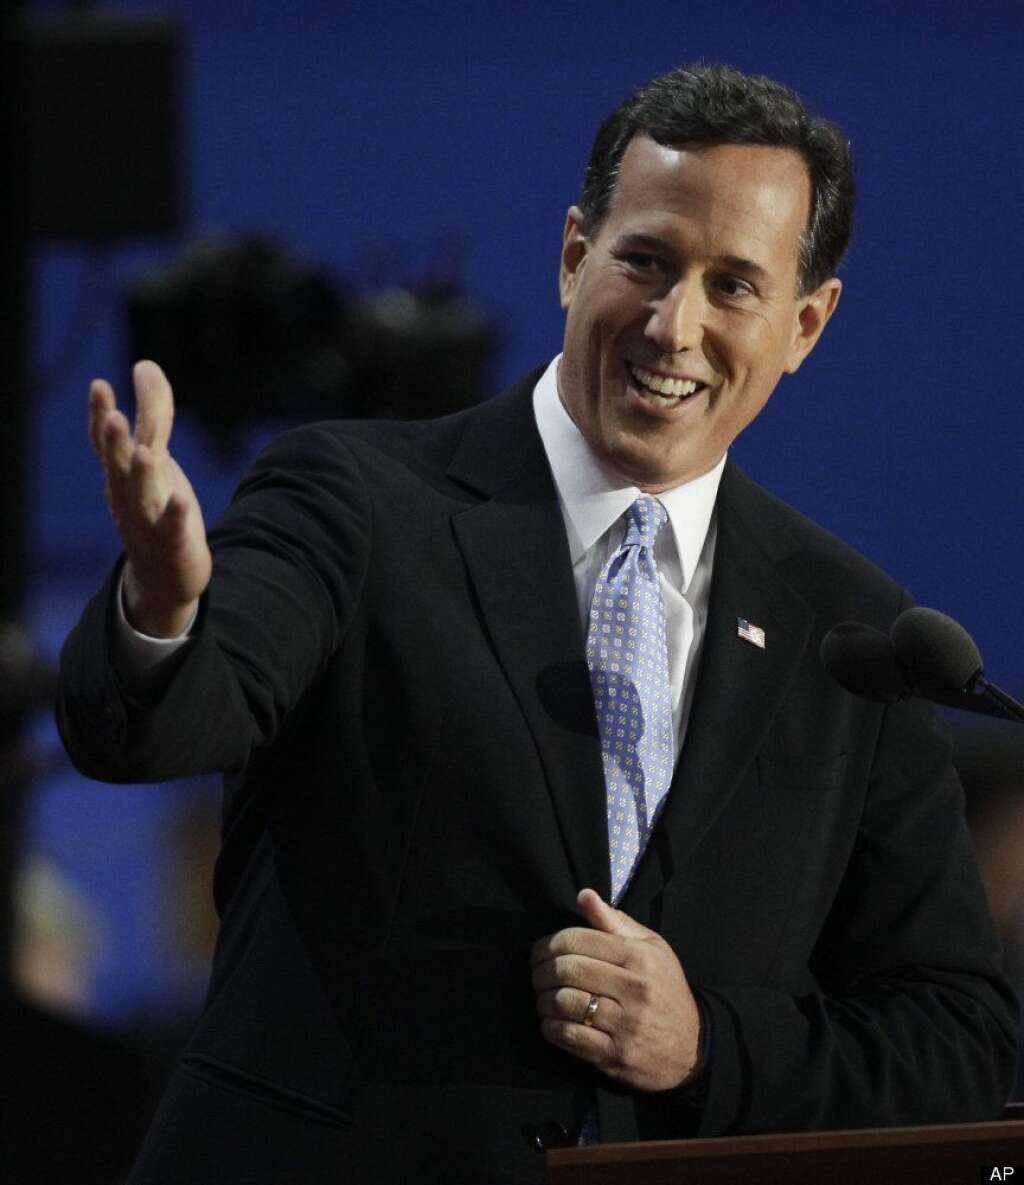 Former Pennsylvania Senator Rick Santorum introduces his wife Karen during his speech during the Republican National Convention in Tampa, Fla., on Tuesday, Aug. 28, 2012. (AP Photo/Charlie Neibergall)